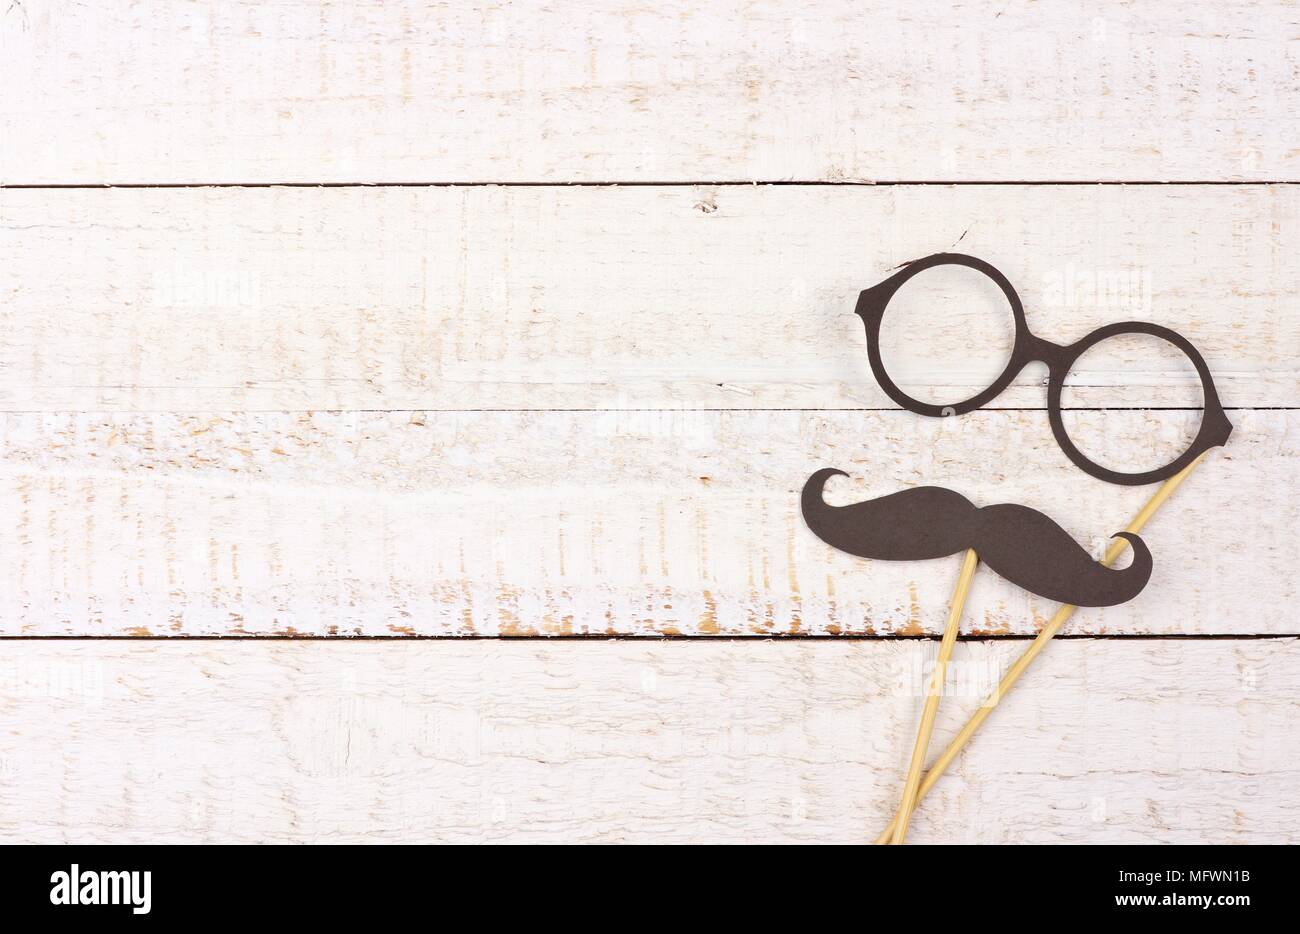 Funny mustache and glasses on sticks against a rustic white wood background. Top view with copy space. Stock Photo